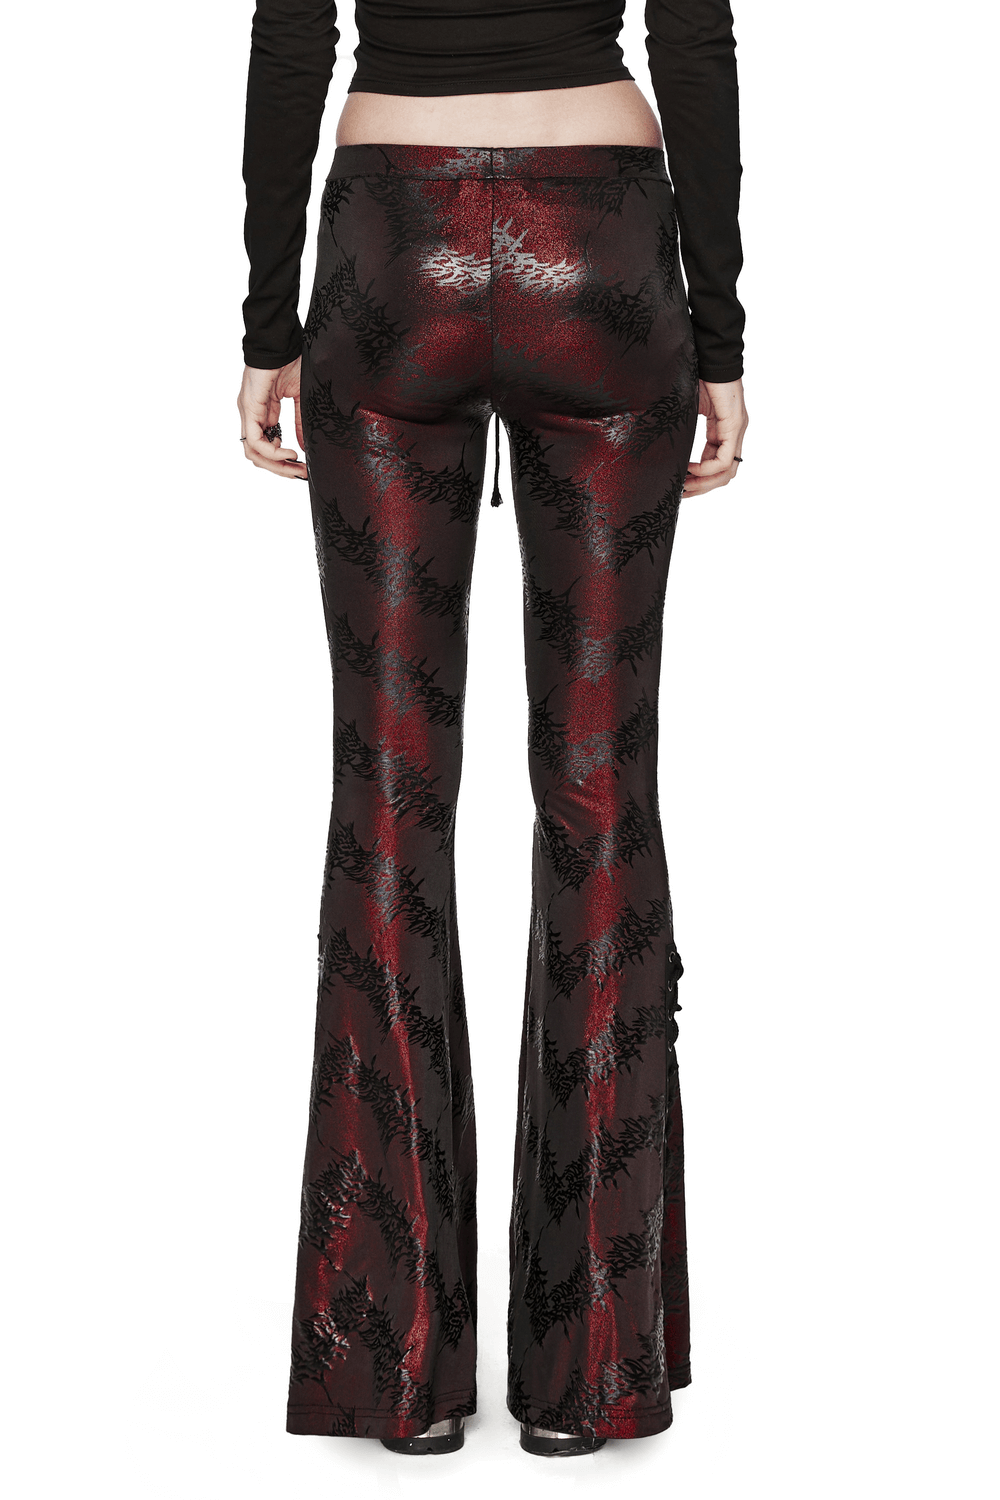 Edgy Sparkly Flared Pants with Drawstring for Women